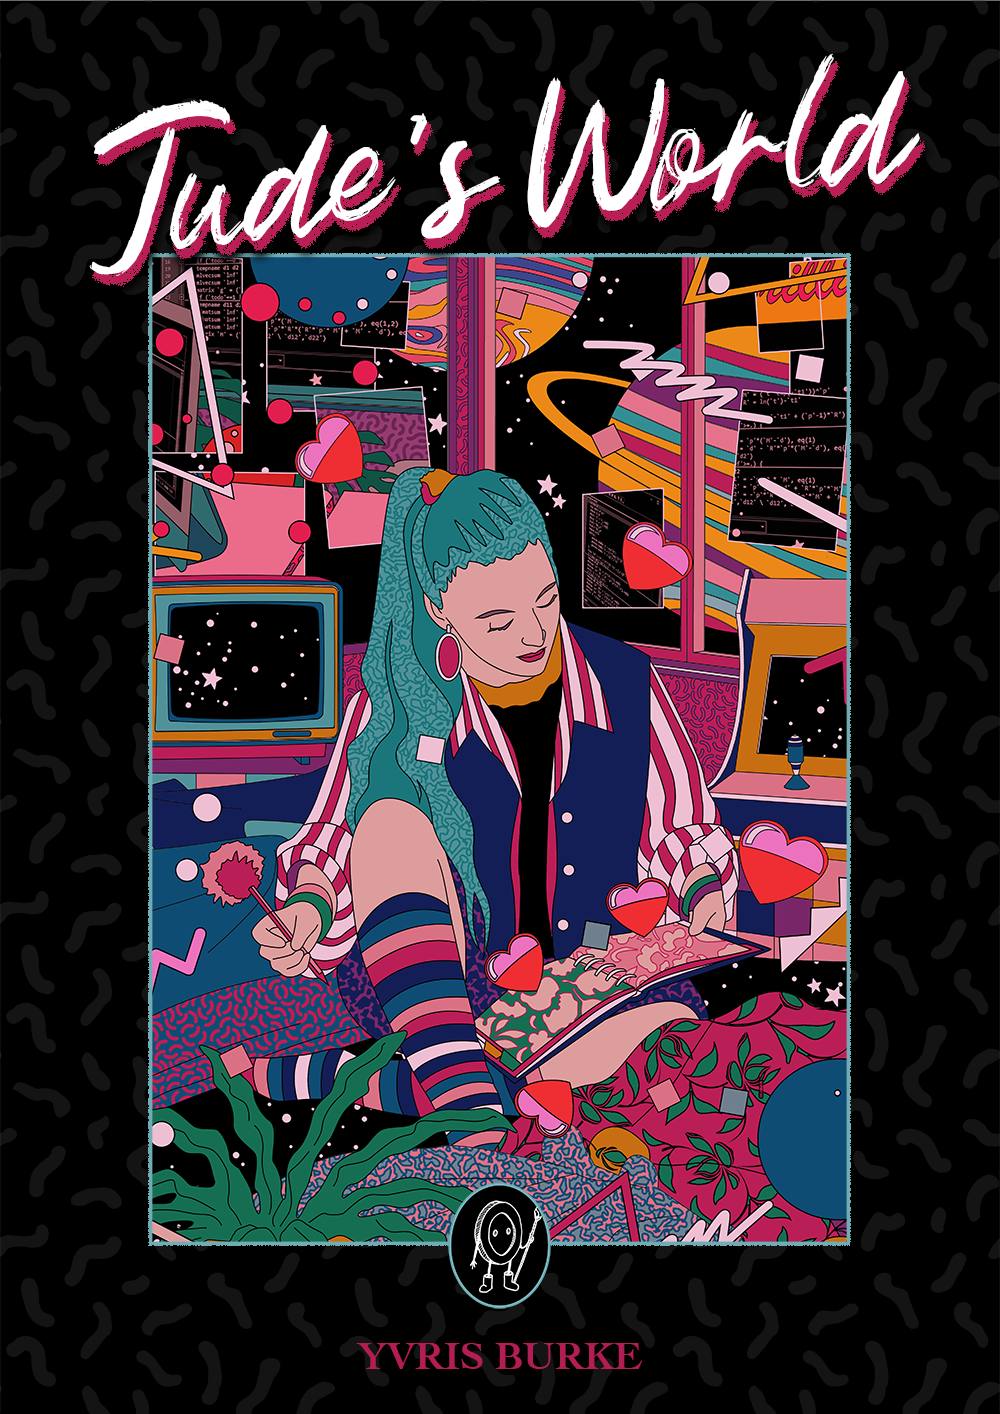 A book cover showing a young girl sitting on her bed writing in her diary. Outside the windows behind her there are planets and stars. The whole scene is very colourful and vibrant.